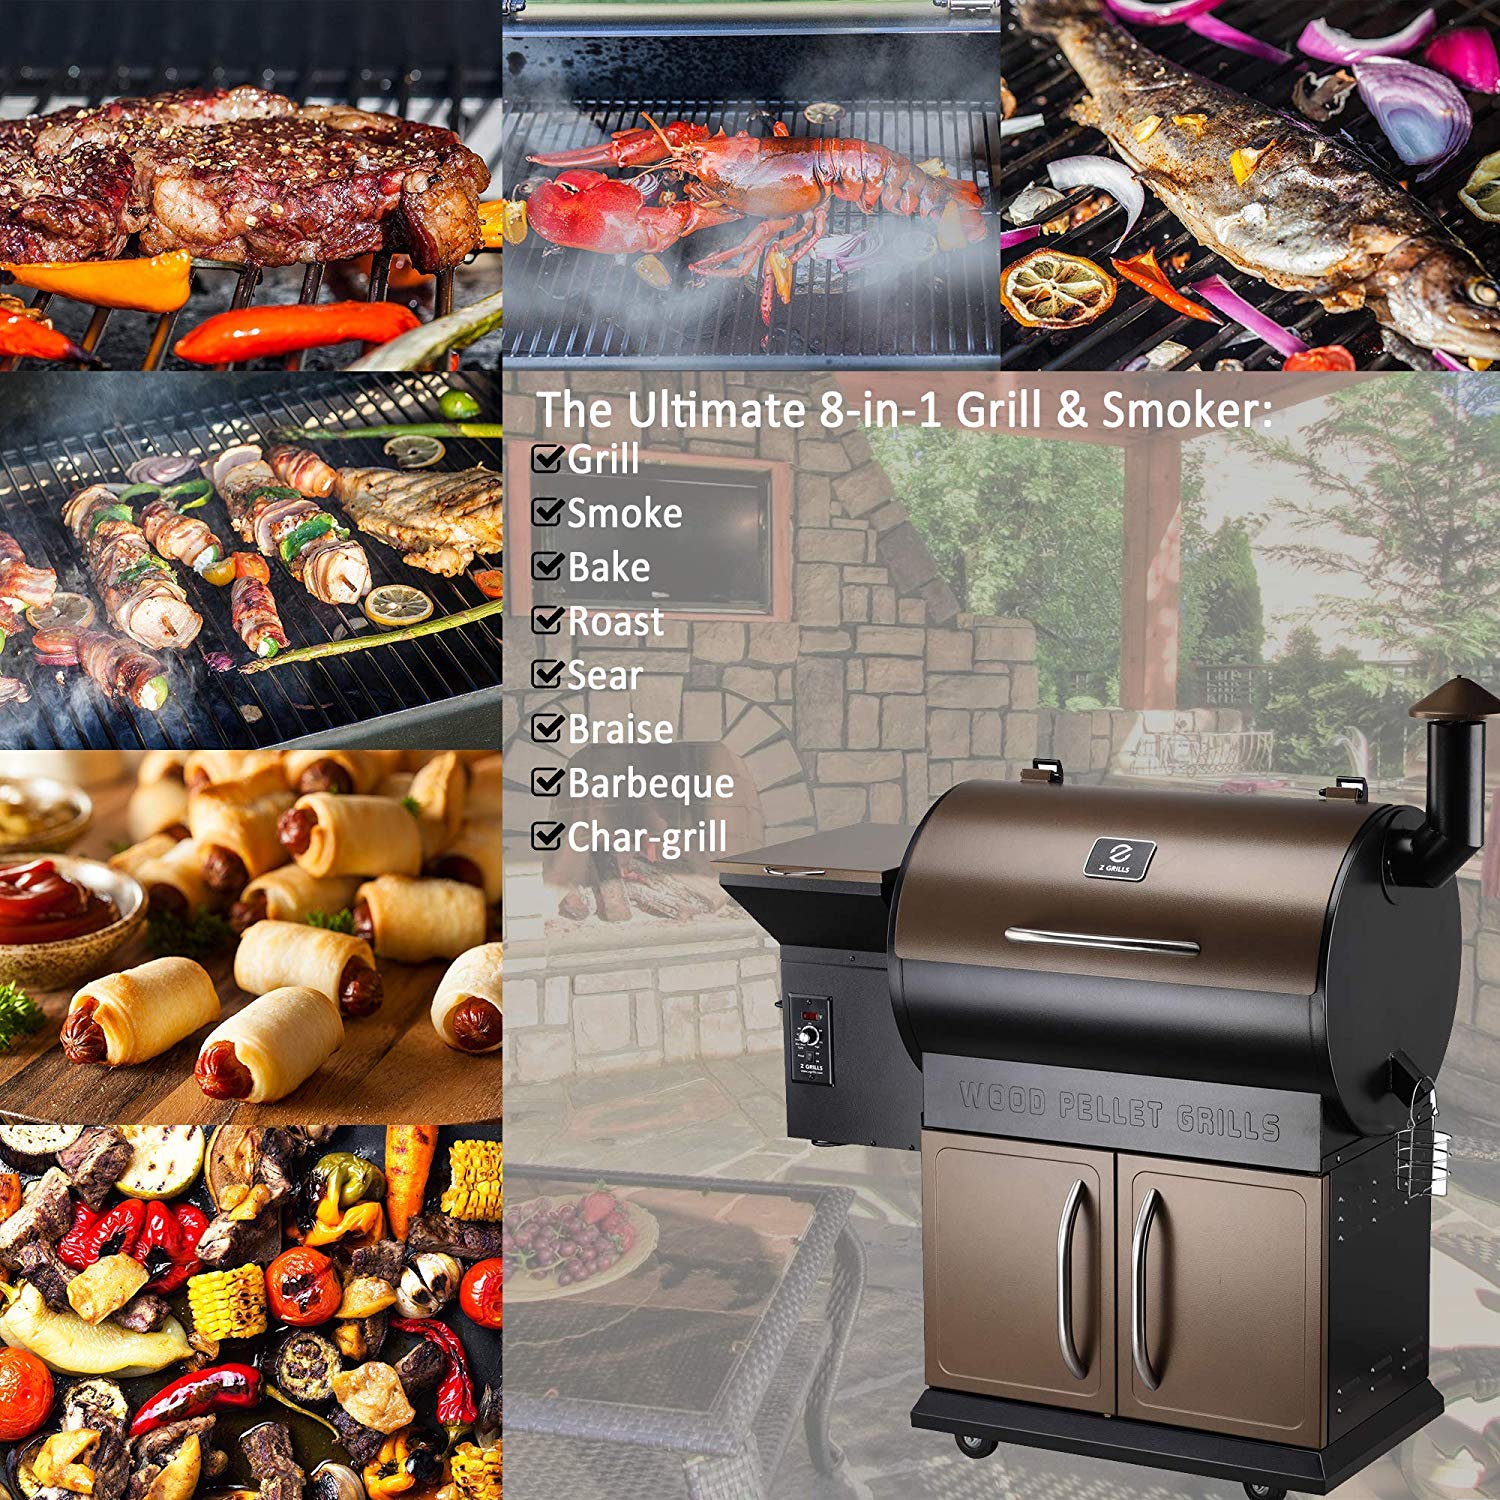 Z GRILLS 700 sq in Wood Pellet Barbecue Grill and Smoker Family Size Outdoor Cooking 8 in 1 Smart BBQ Grill - image 4 of 7